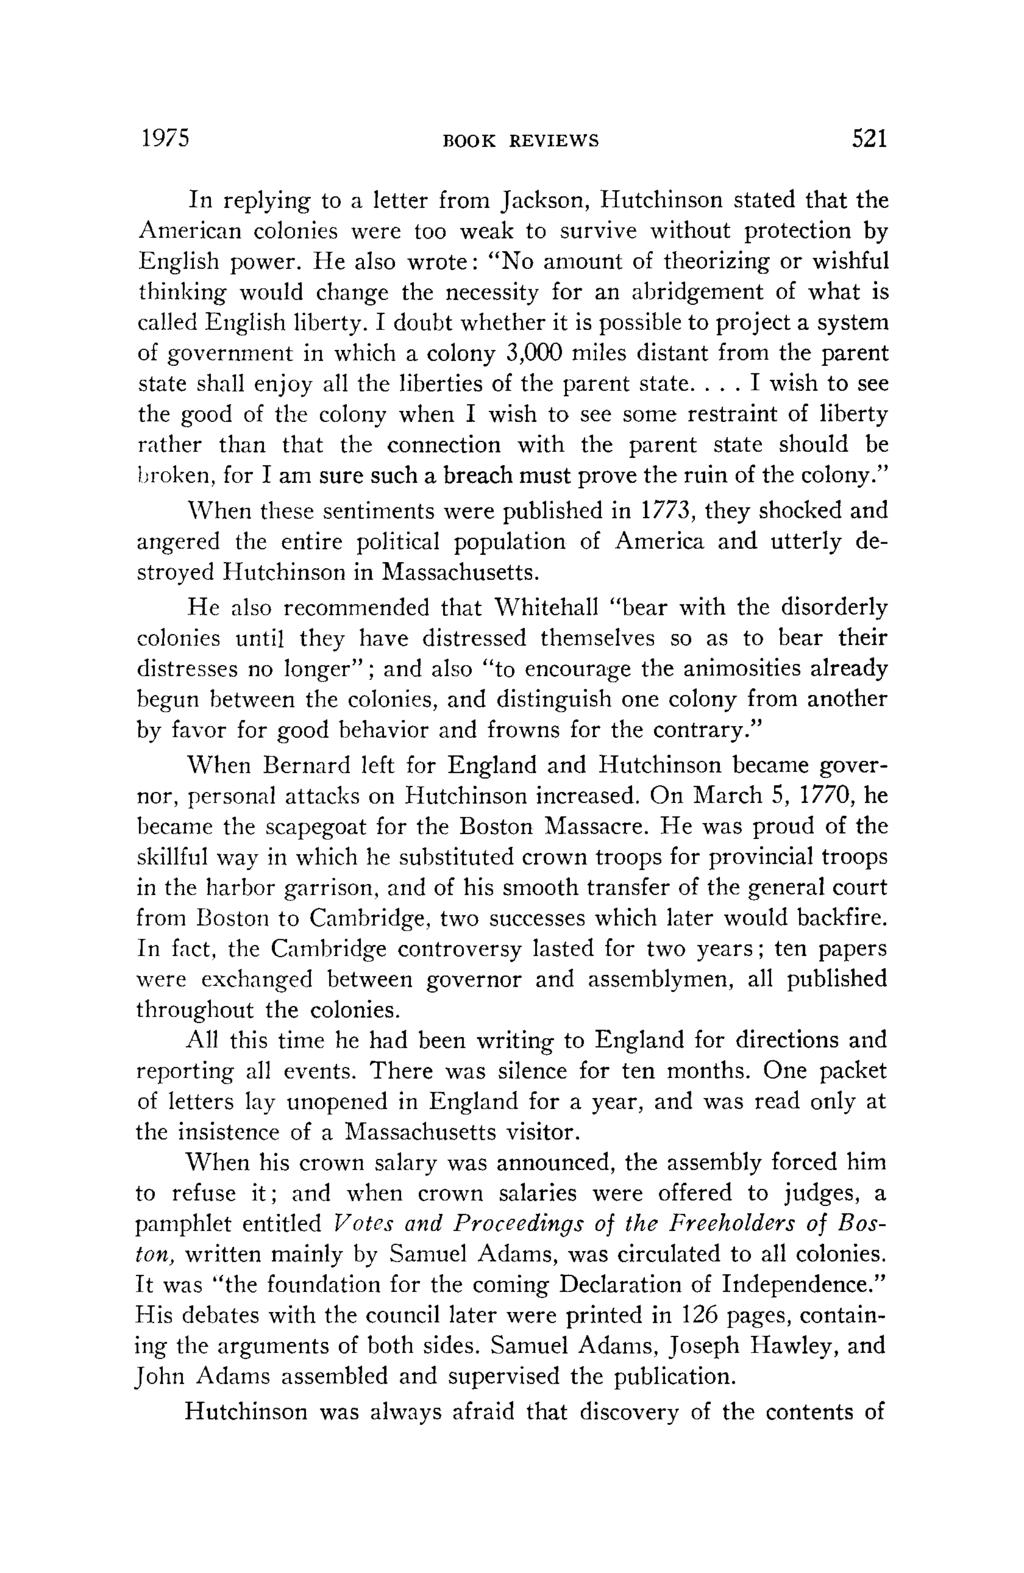 1975 BOOK REVIEWS 521 In replying to a letter from Jackson, Hutchinson stated that the American colonies were too weak to survive without protection by English power.